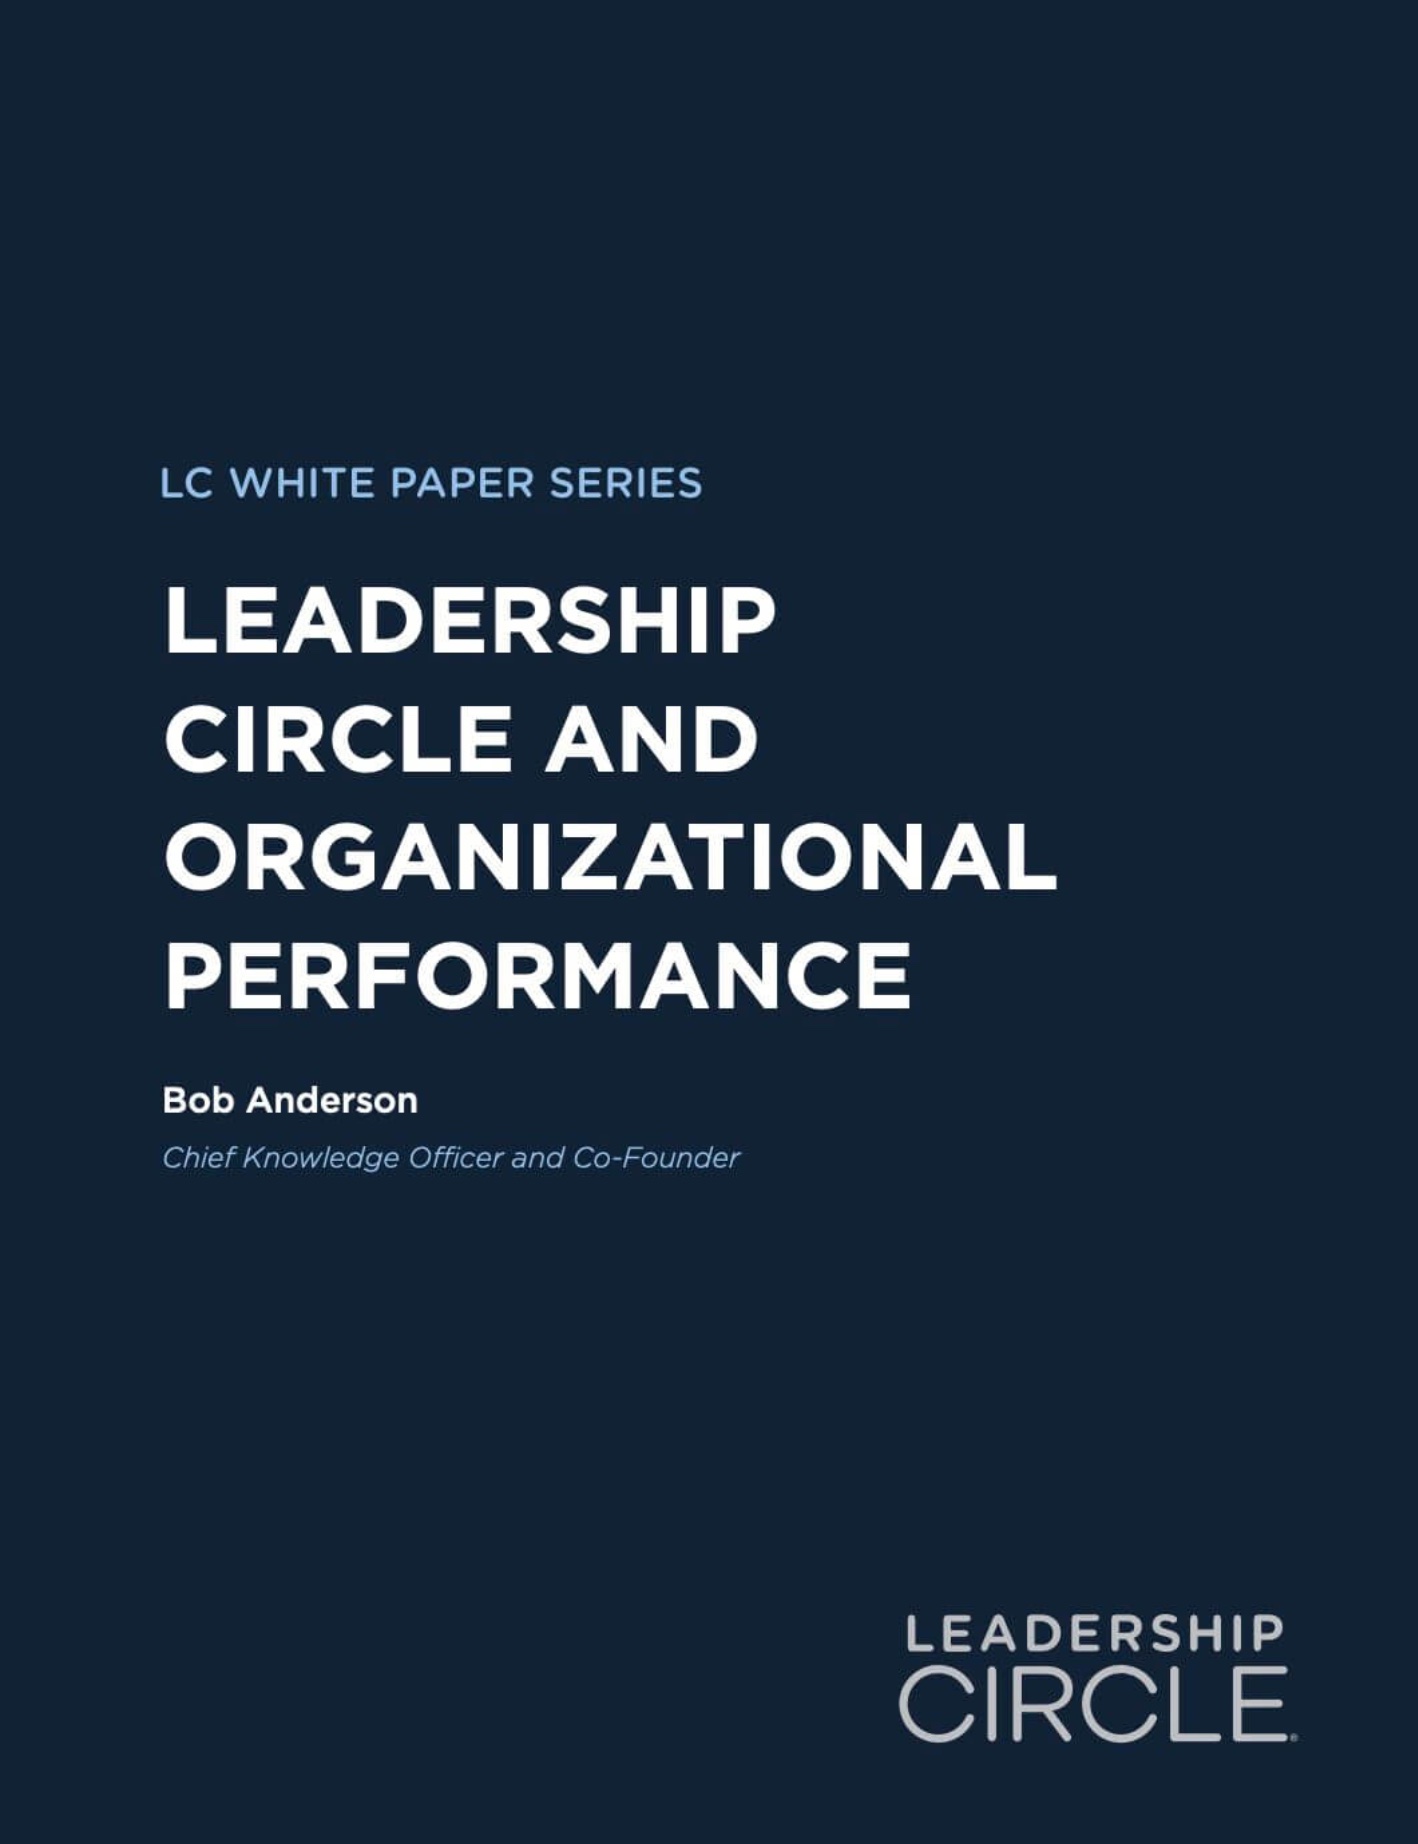 leadership circle consulting and organizational performance whitepaper